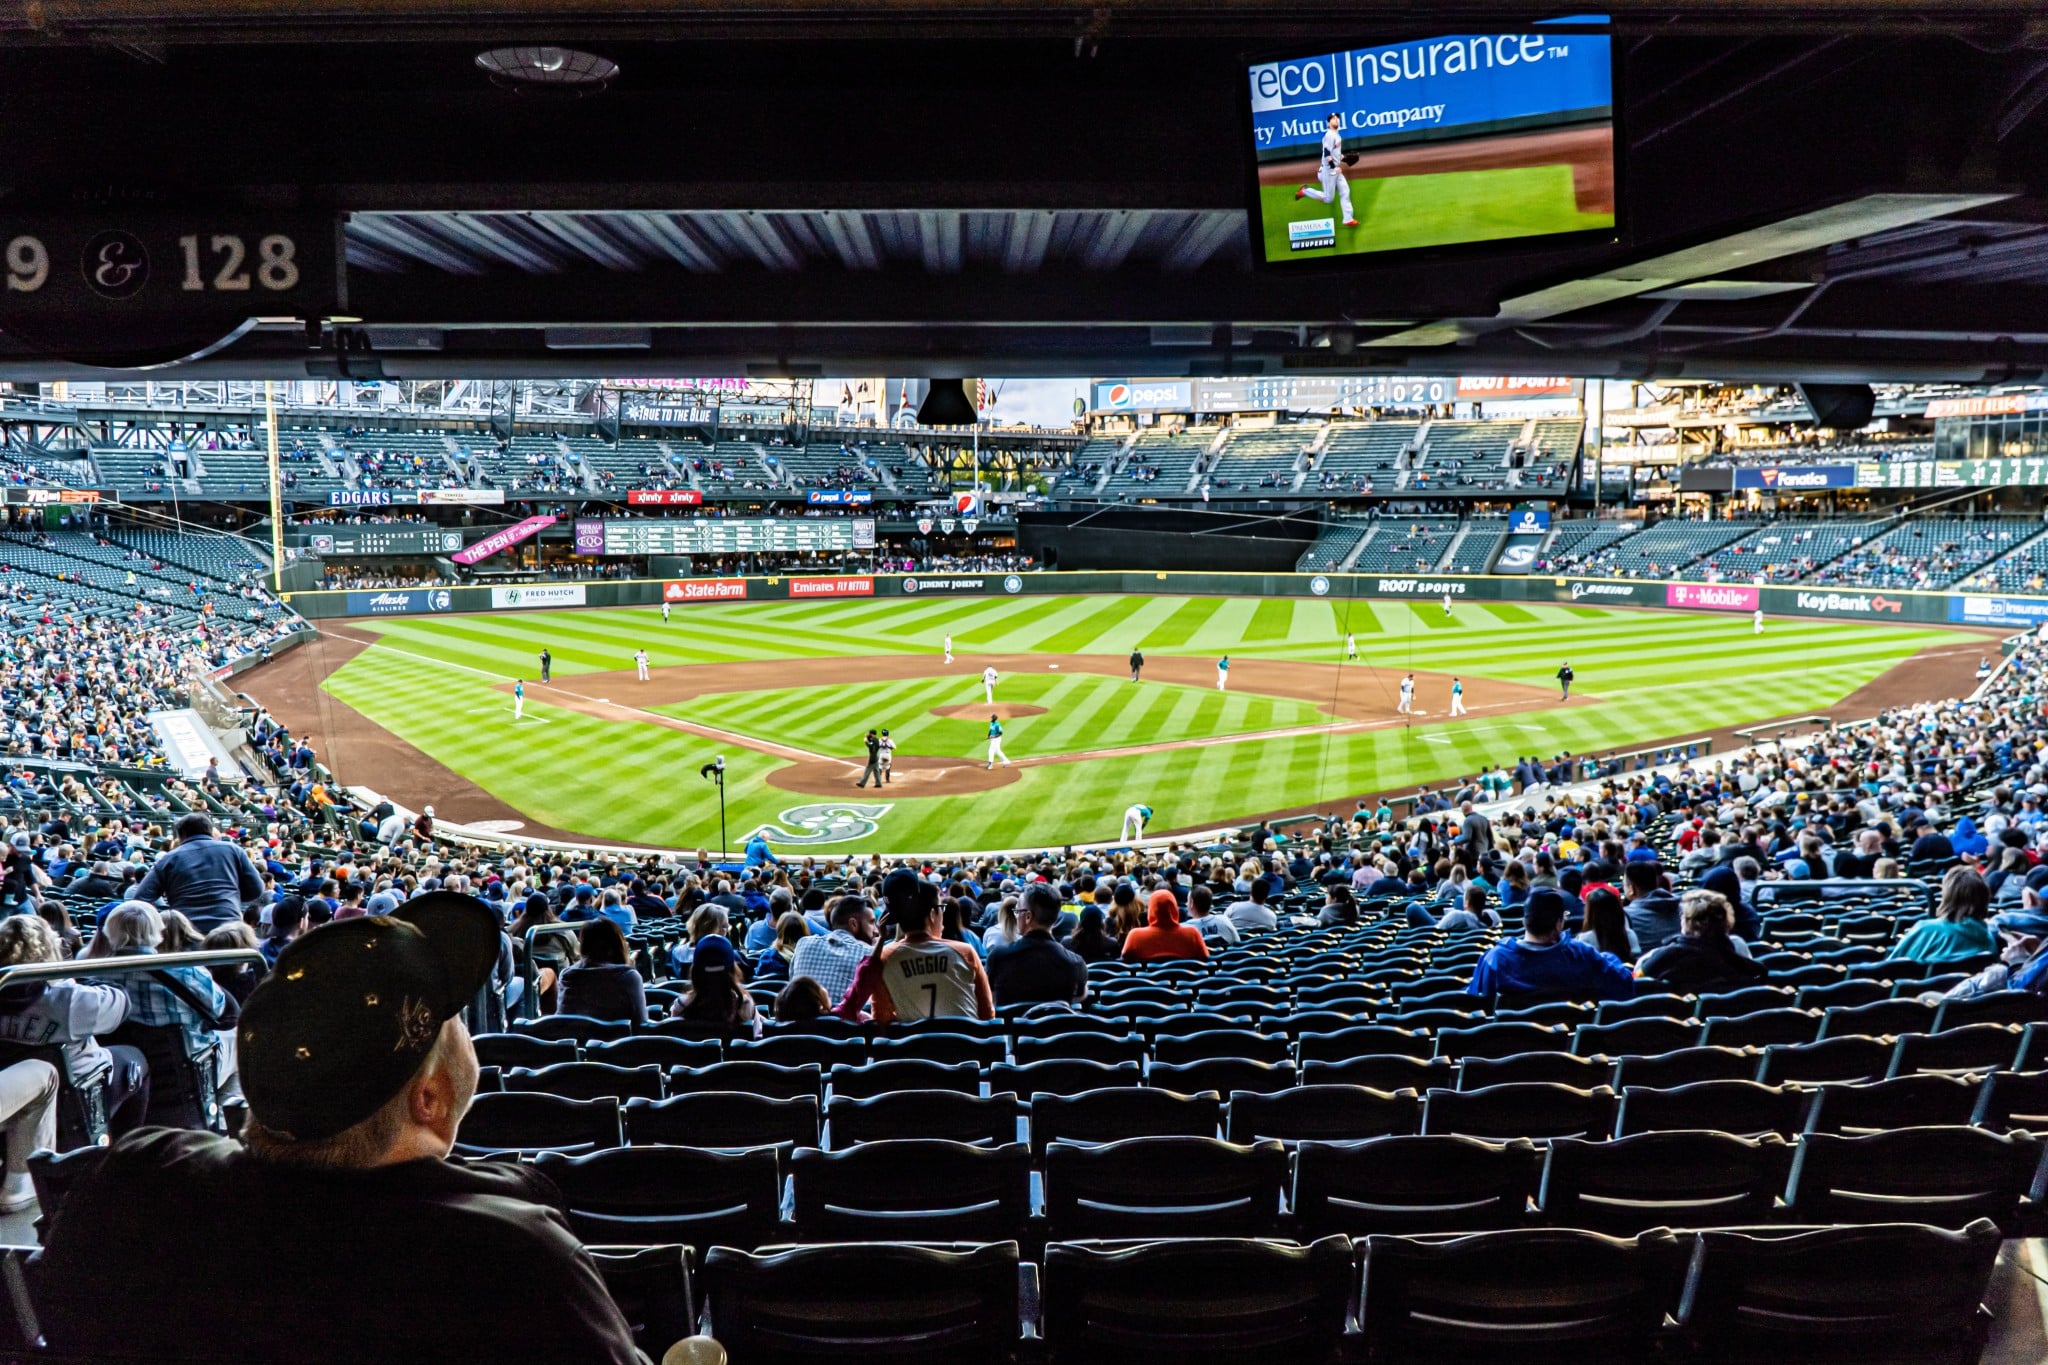 Seattle Software Developers | Seattle Mariners Off to HOT Start Part 6 | seattle mariners